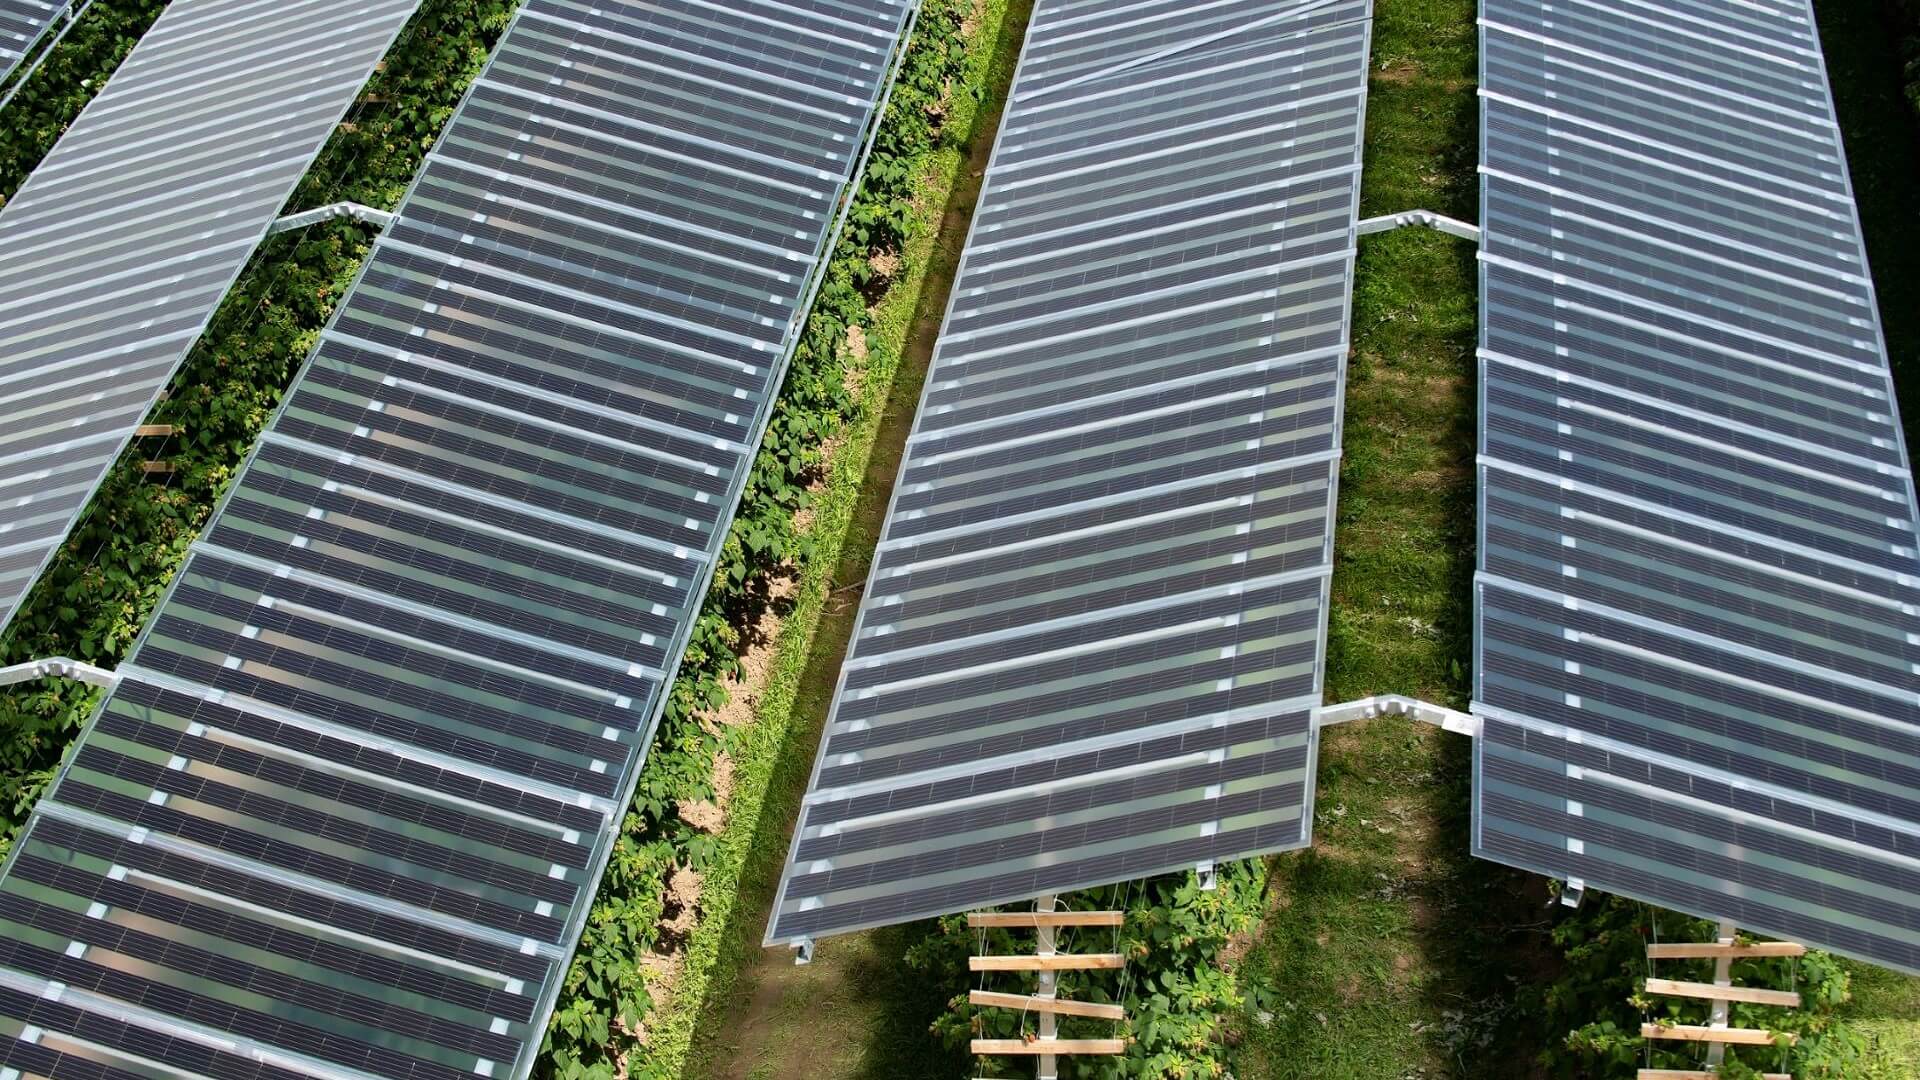 row upon row of solar panels with green crops underneath